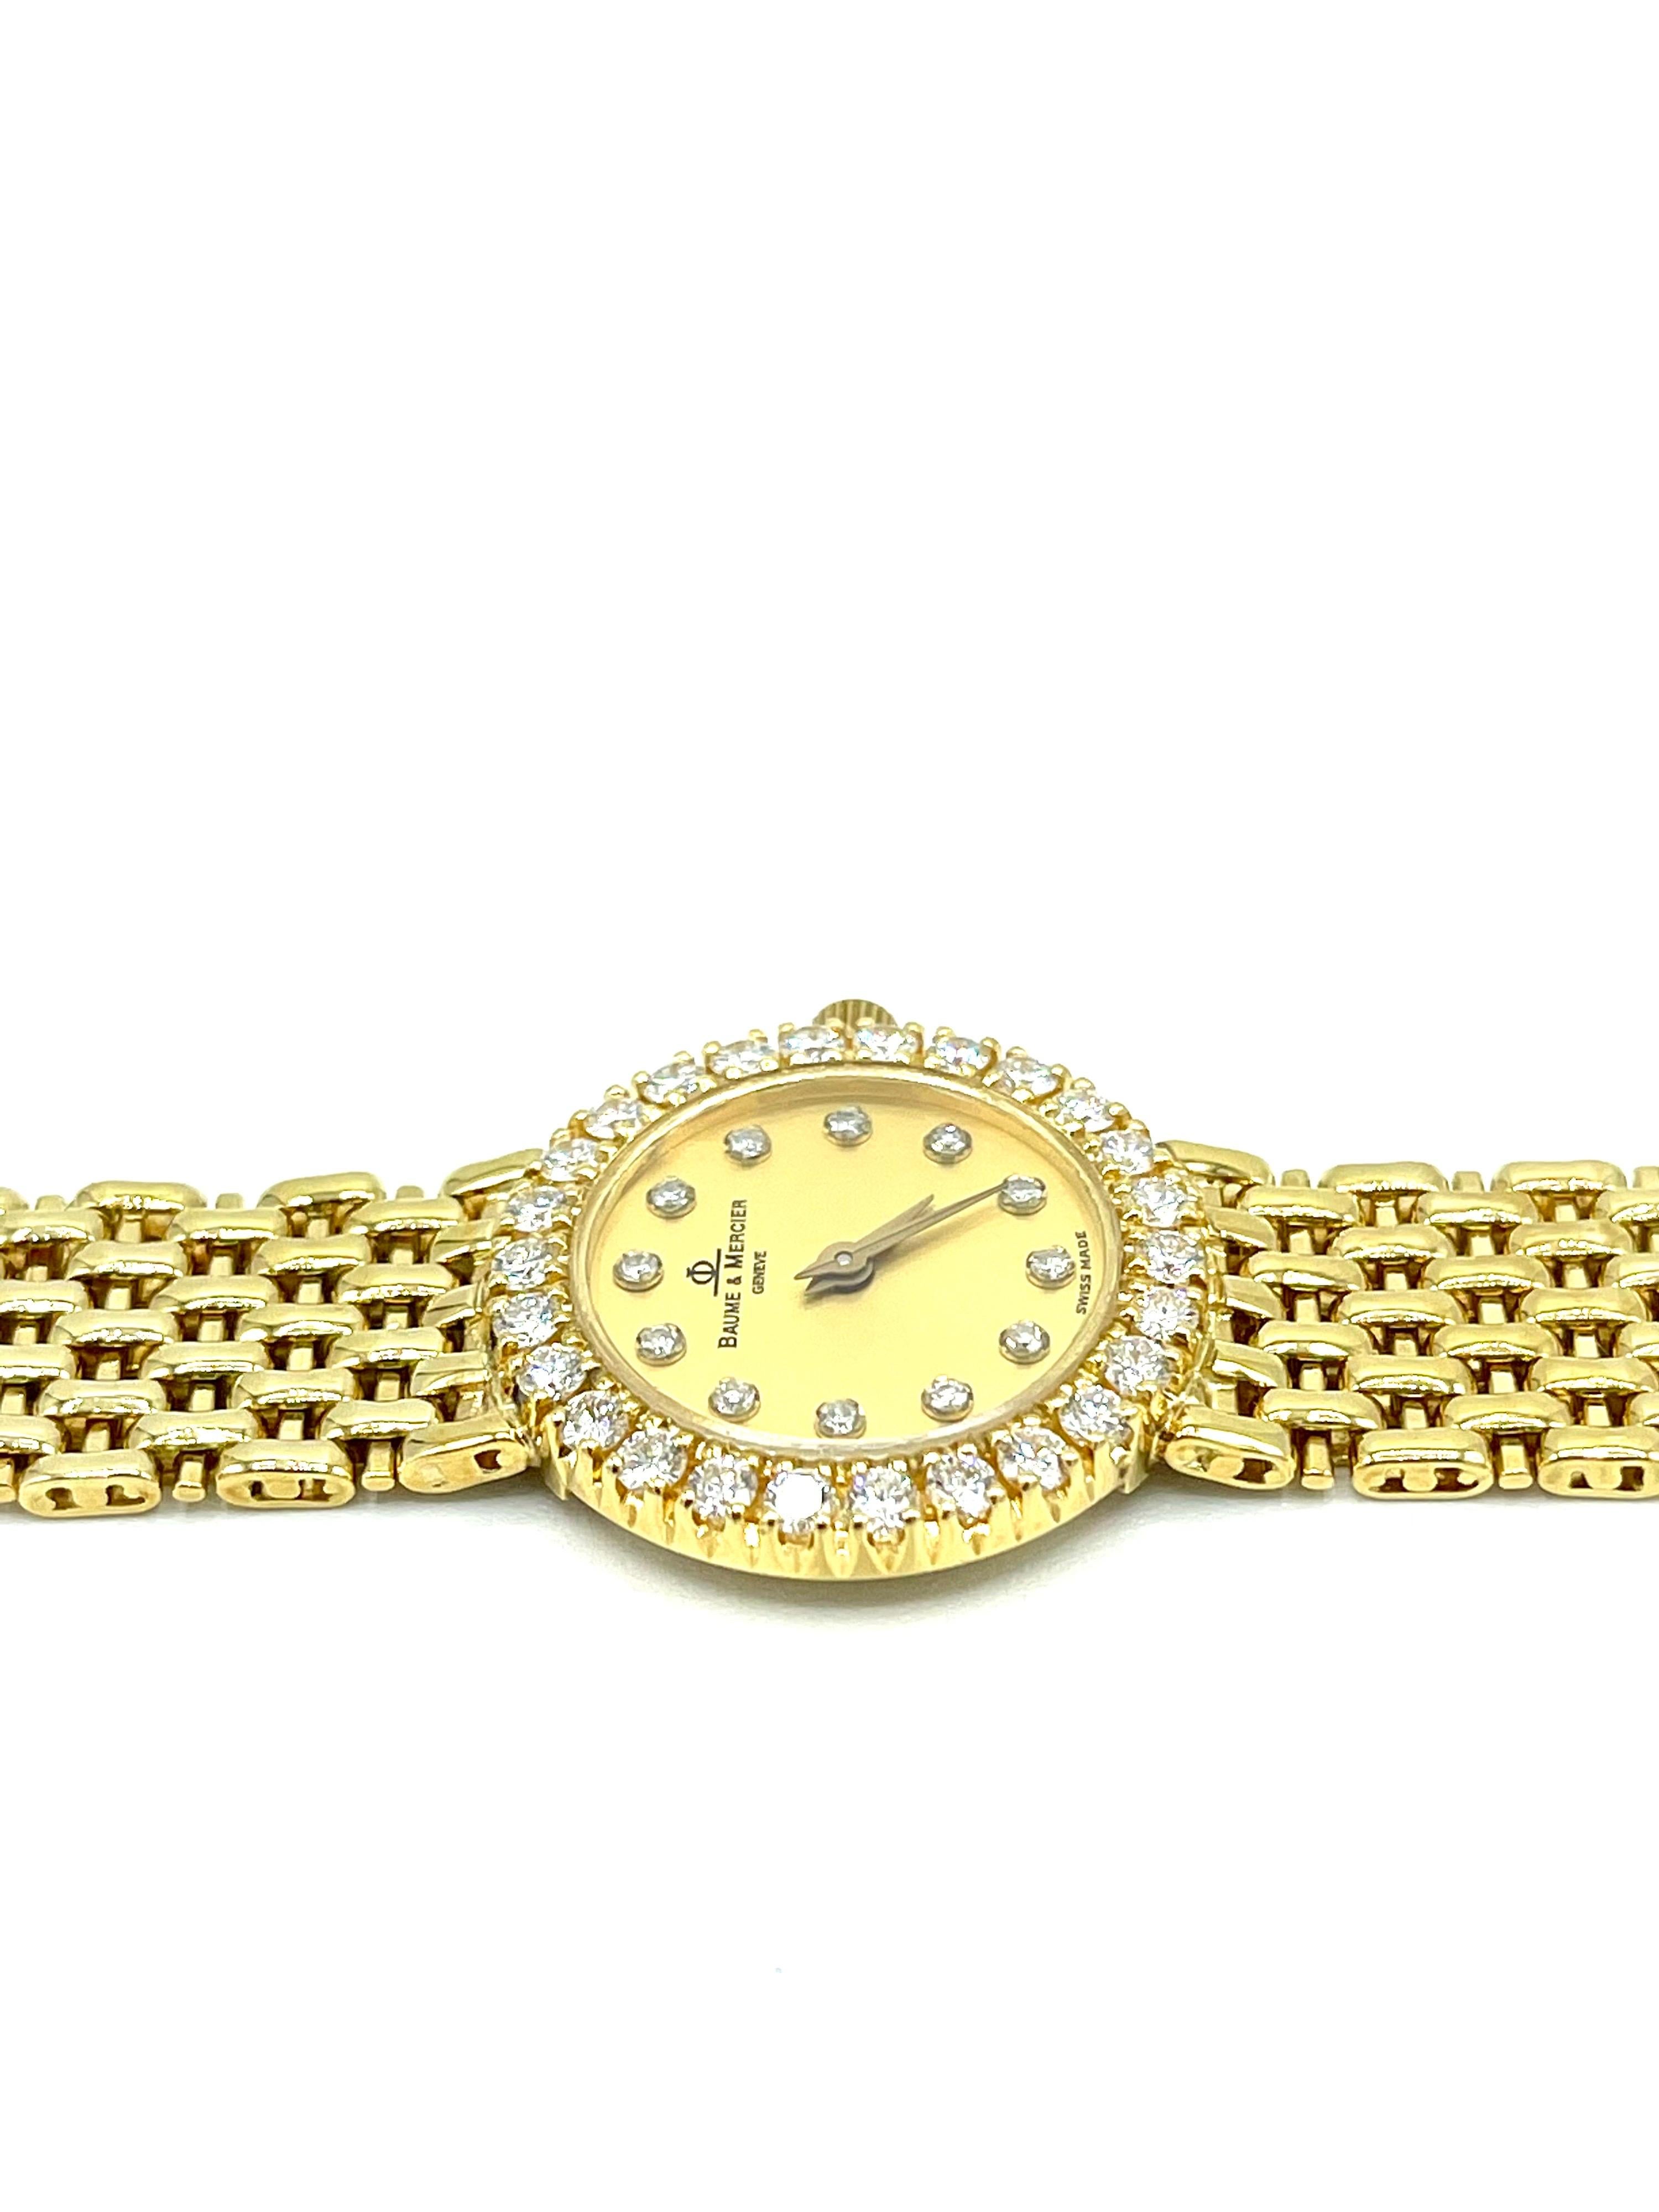 A beautiful ladies 18k gold Baume & Mercier watch.  The watch contains Diamond markers on the dial and a Diamond bezel, on a beautiful mesh bracelet of 18k yellow gold.  There is 1.10 carats in Diamonds.  The back of the case is stamped 